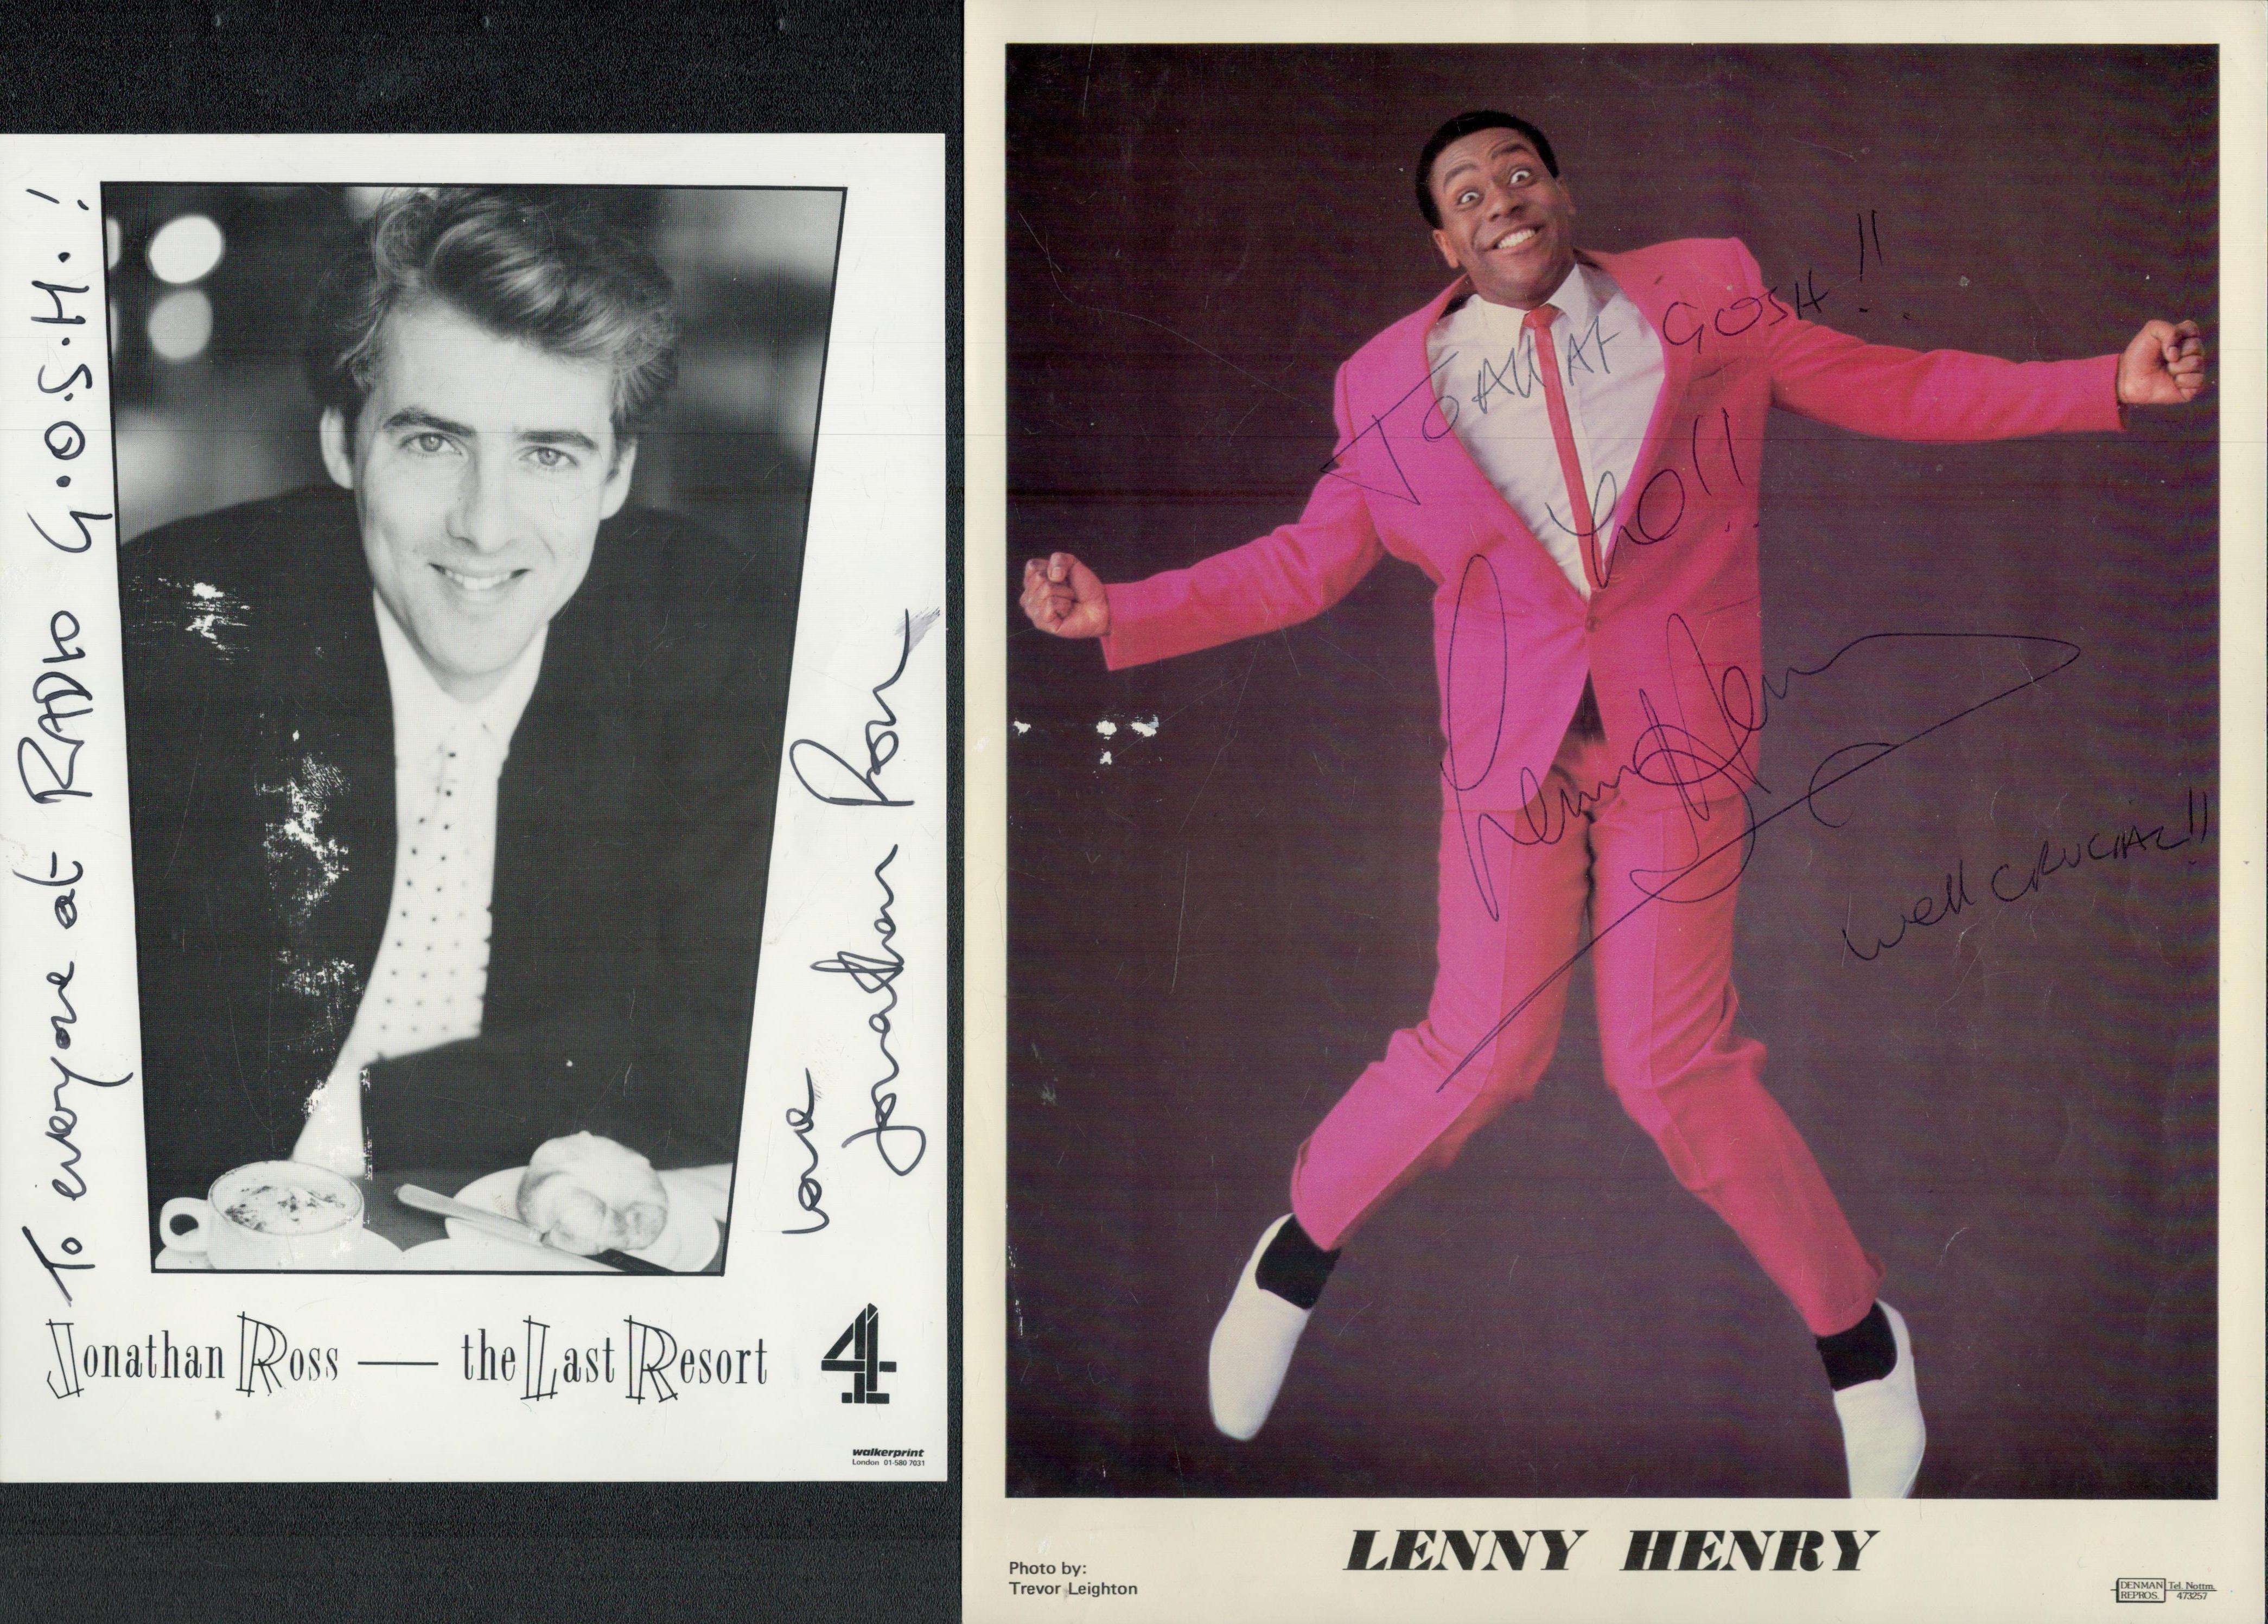 TV ENTERTAINERS 3 signed photos Lenny Henry, Jonathan Ross and Bob Holness. Good Condition. All